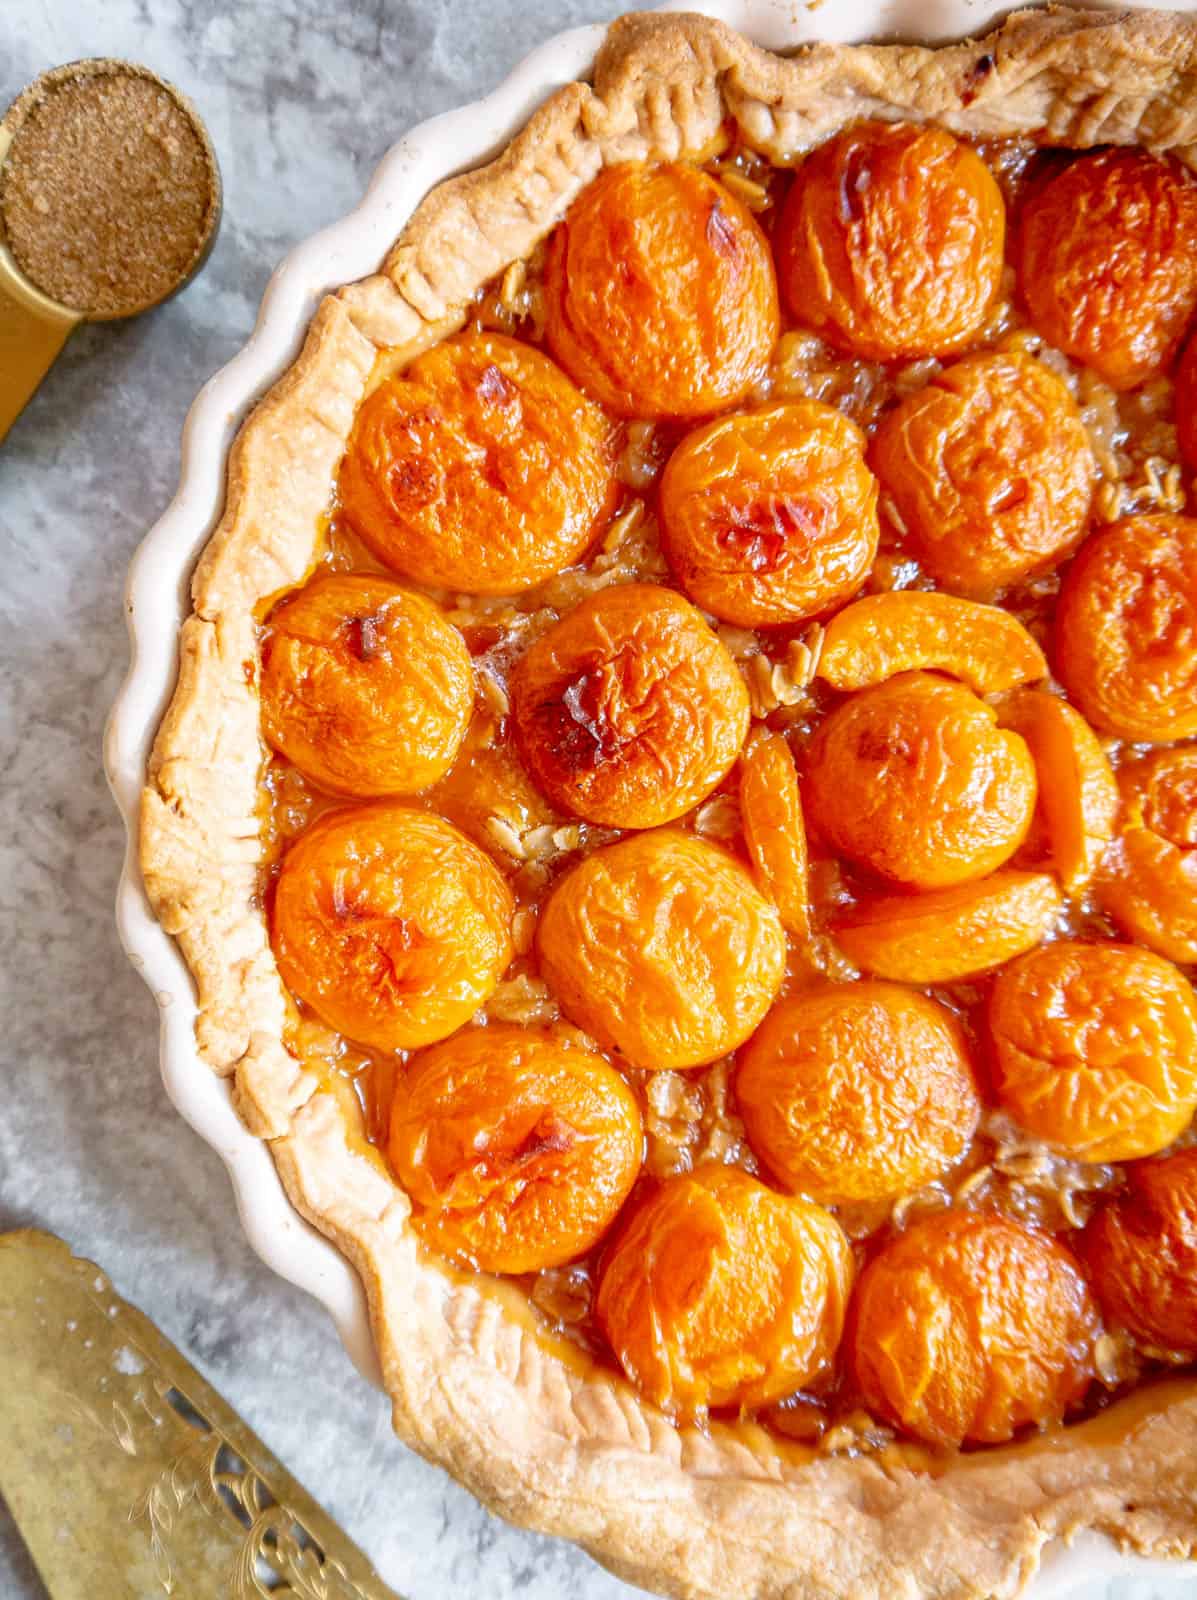 Freshly baked apricot dessert in a pan.